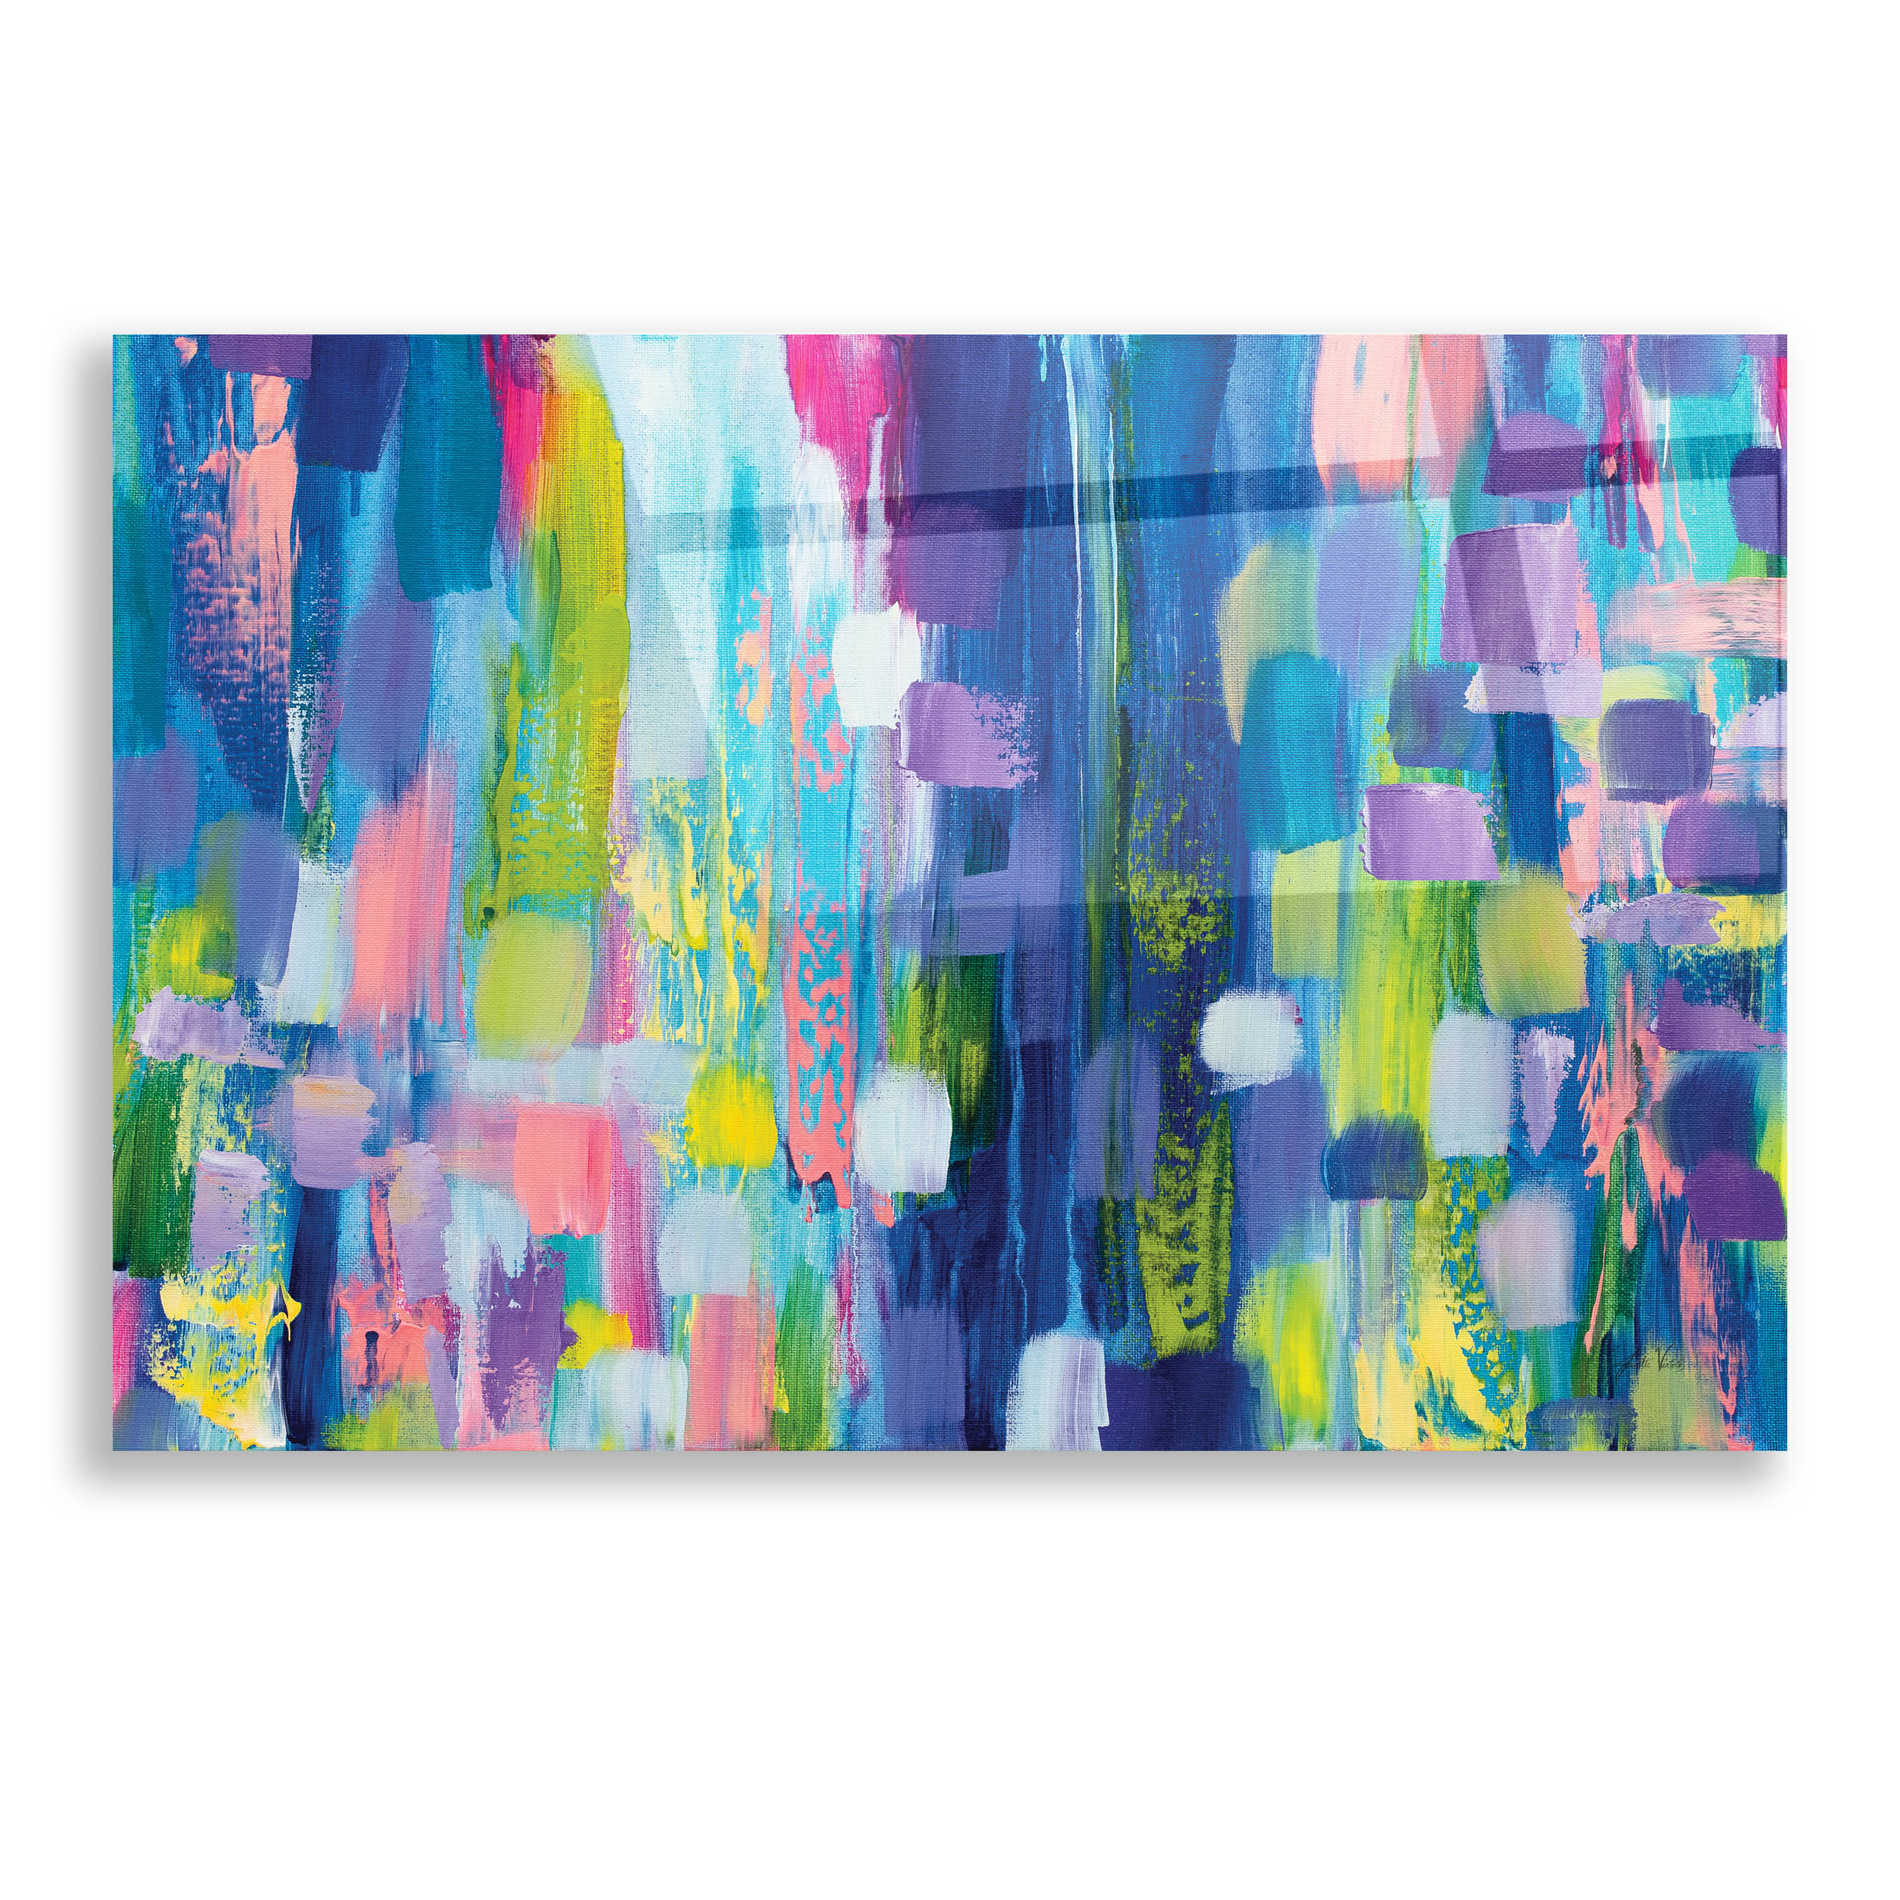 Epic Art 'Radiance' by Jeanette Vertentes, Acrylic Glass Wall Art,16x12